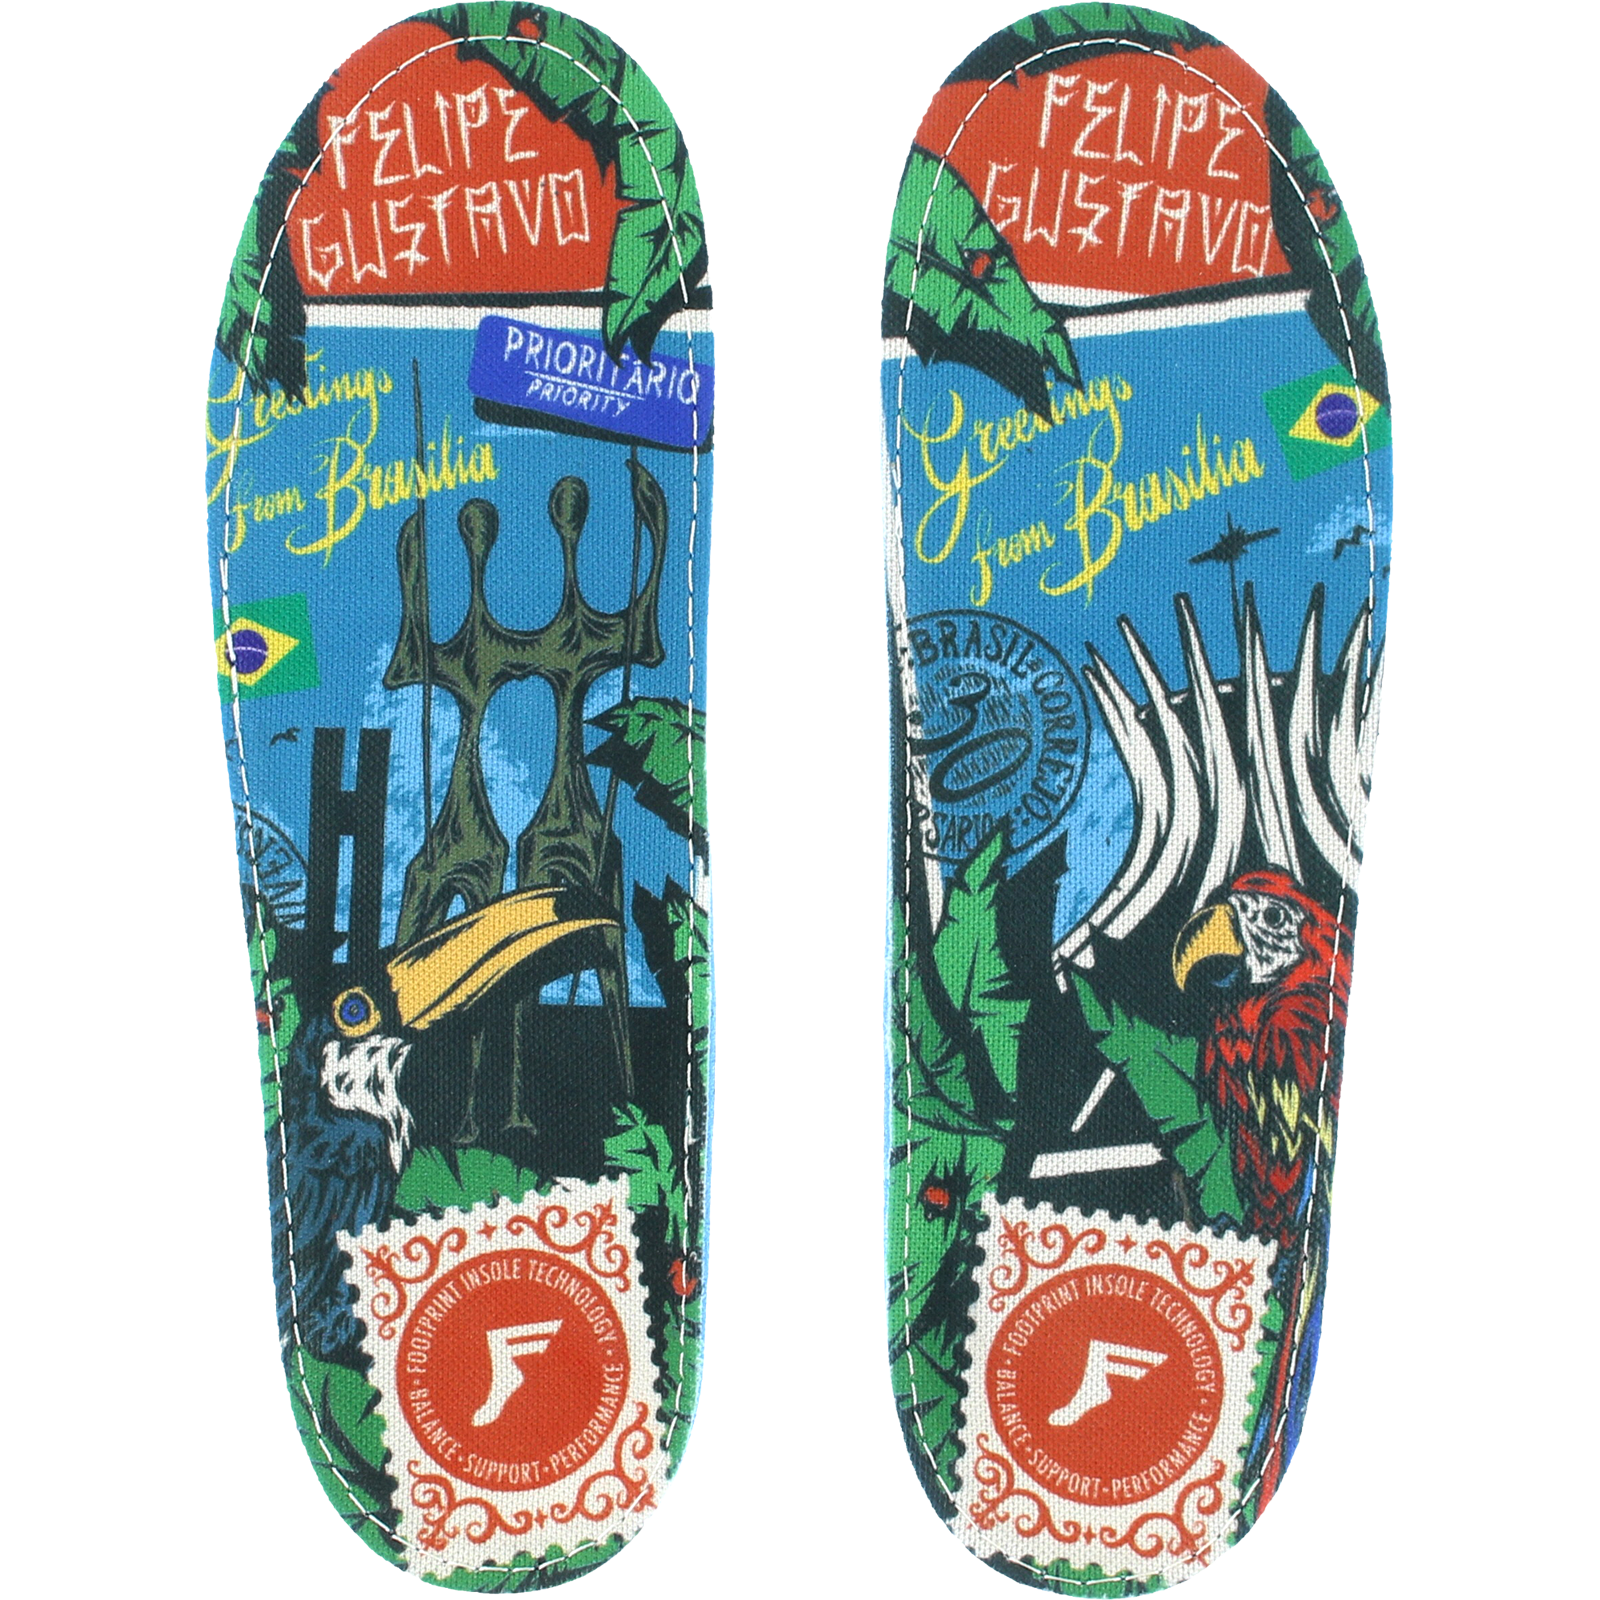 Footprint Gustavo Gamechanger 7-7.5 Insole | Universo Extremo Boards Skate & Surf